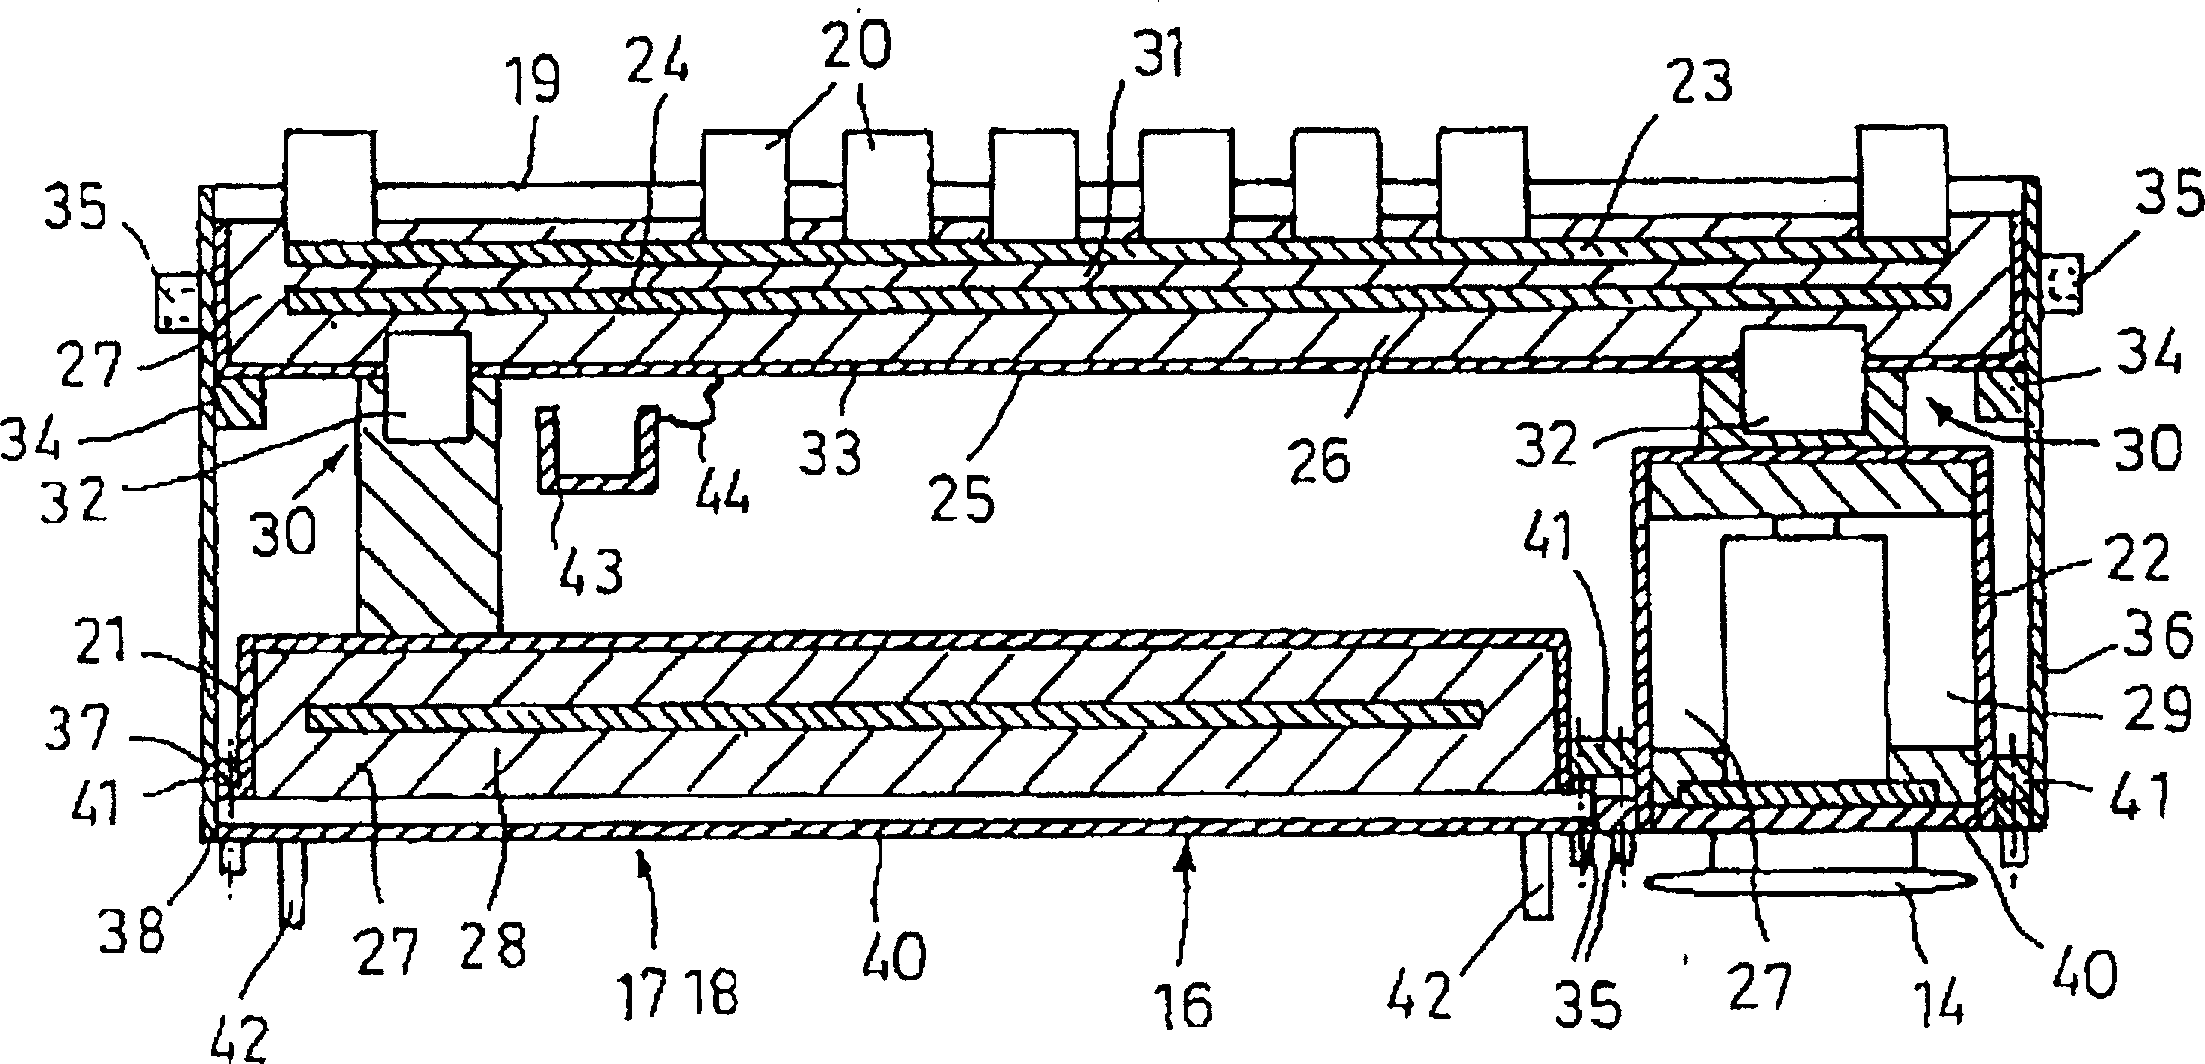 Control apparatus for controlling electrohydraulic mining machine